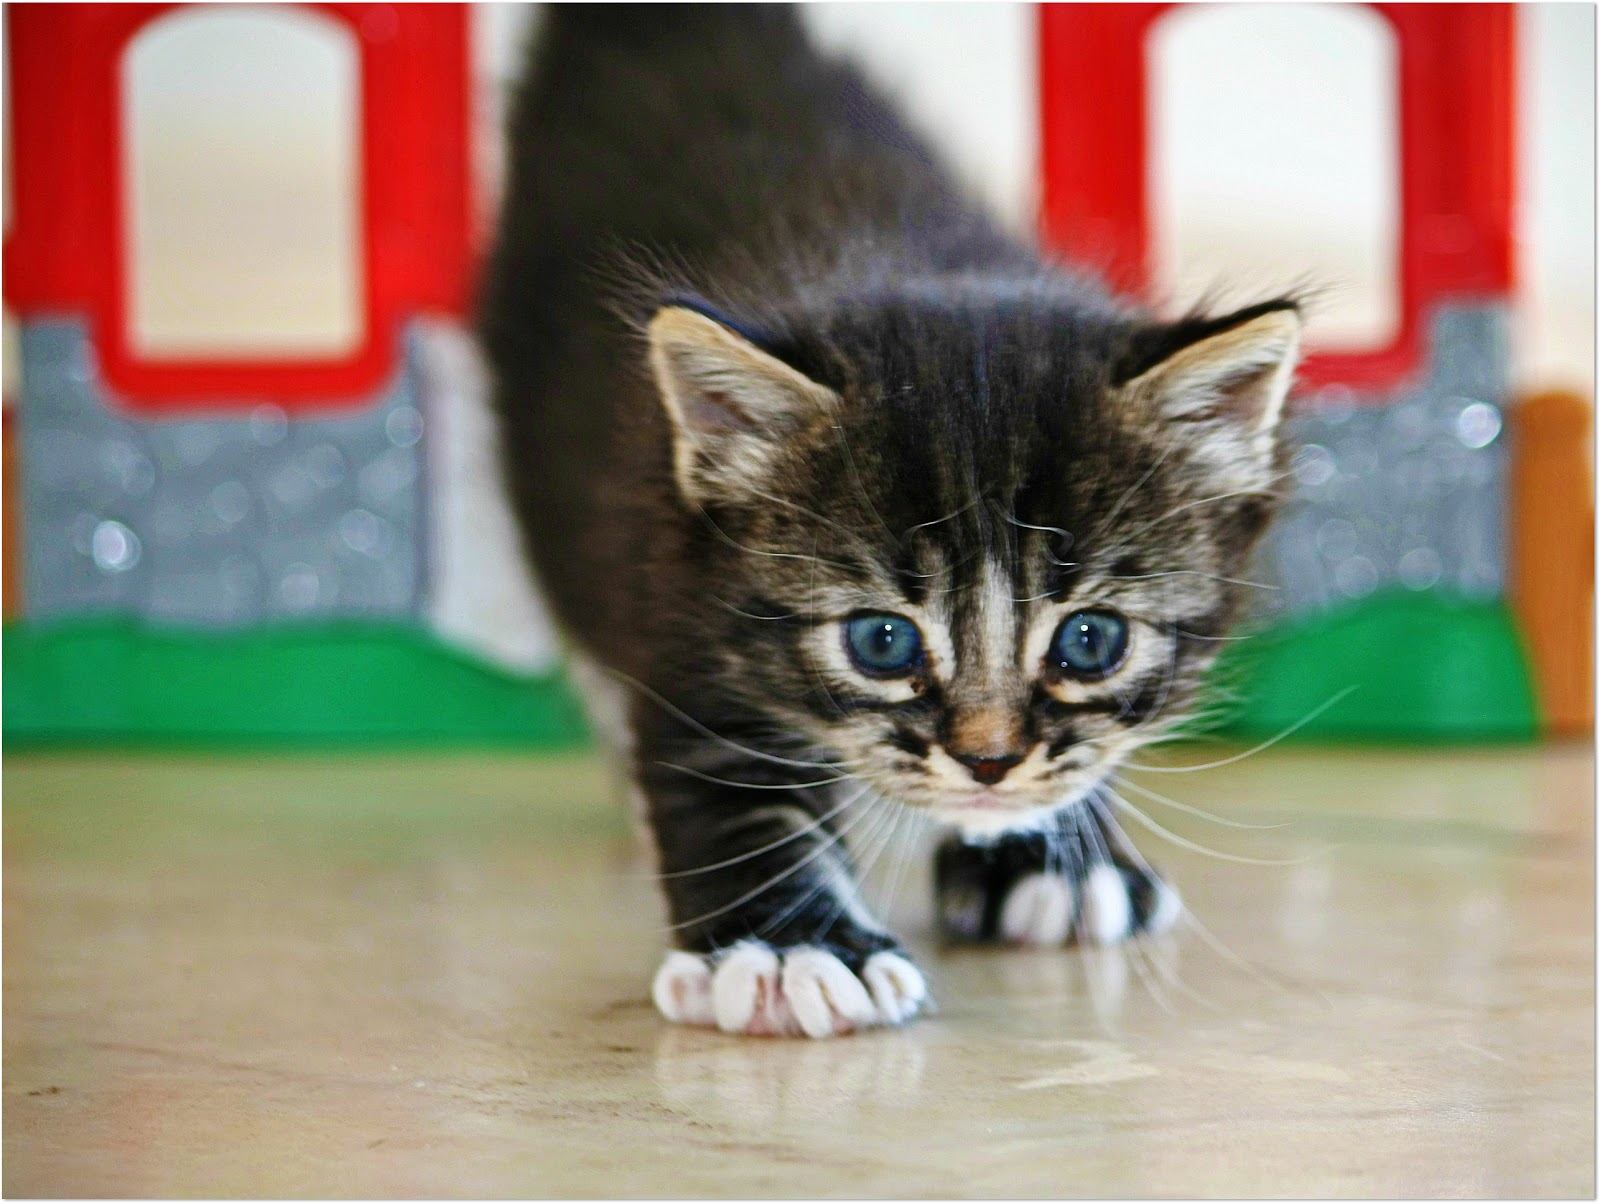 little_kitty____by_violas_visions_from_flickr_cc-nc-sa.jpg